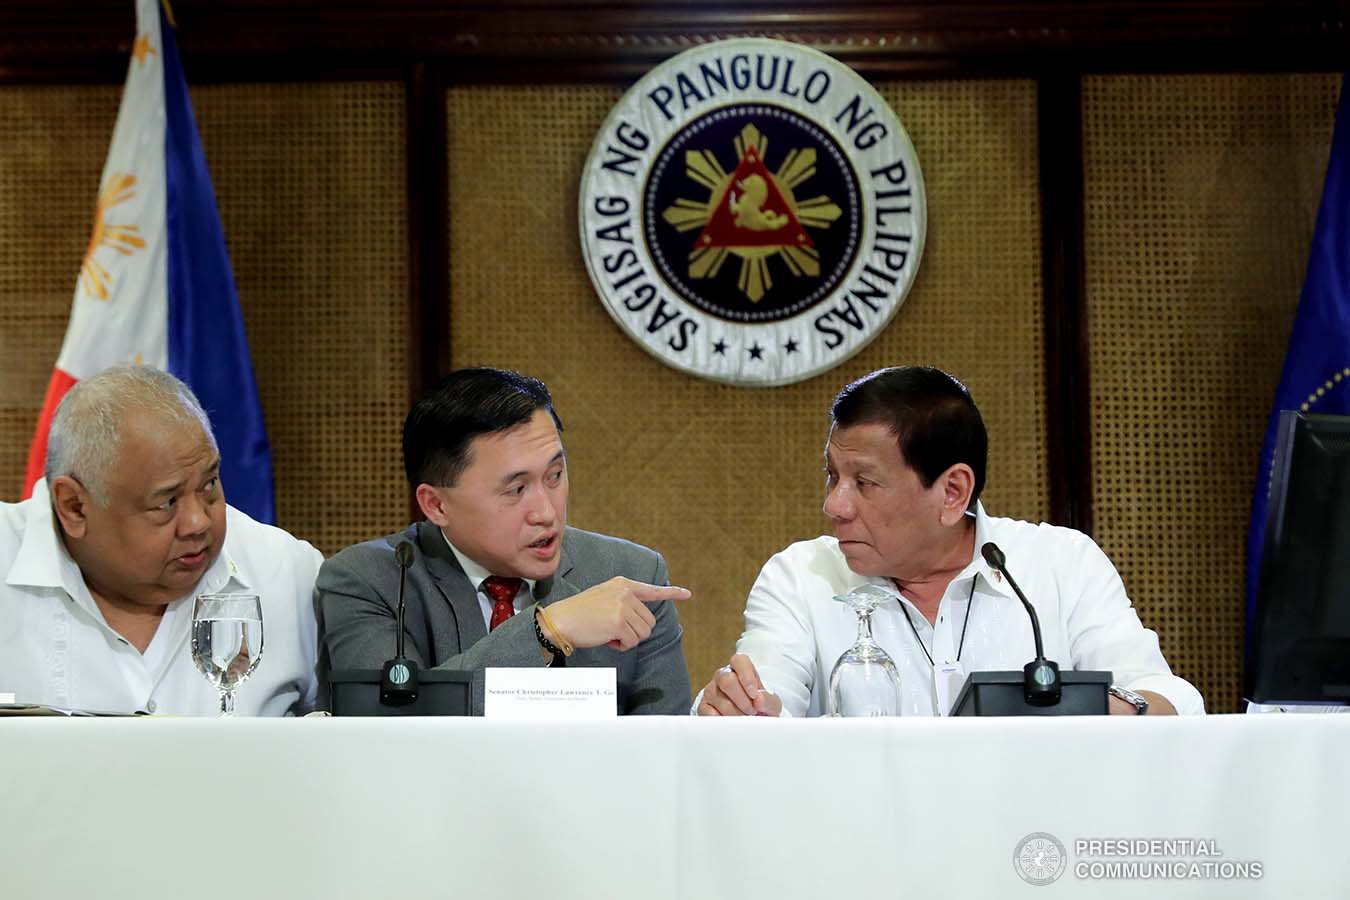 President Rodrigo Roa Duterte confers with Executive Secretary Salvador Medialdea and Senator Christopher "Bong" Go during a meeting with the Inter-Agency Task Force for the Management of Emerging Infectious Diseases at the Malacañan Palace on March 9, 2020.